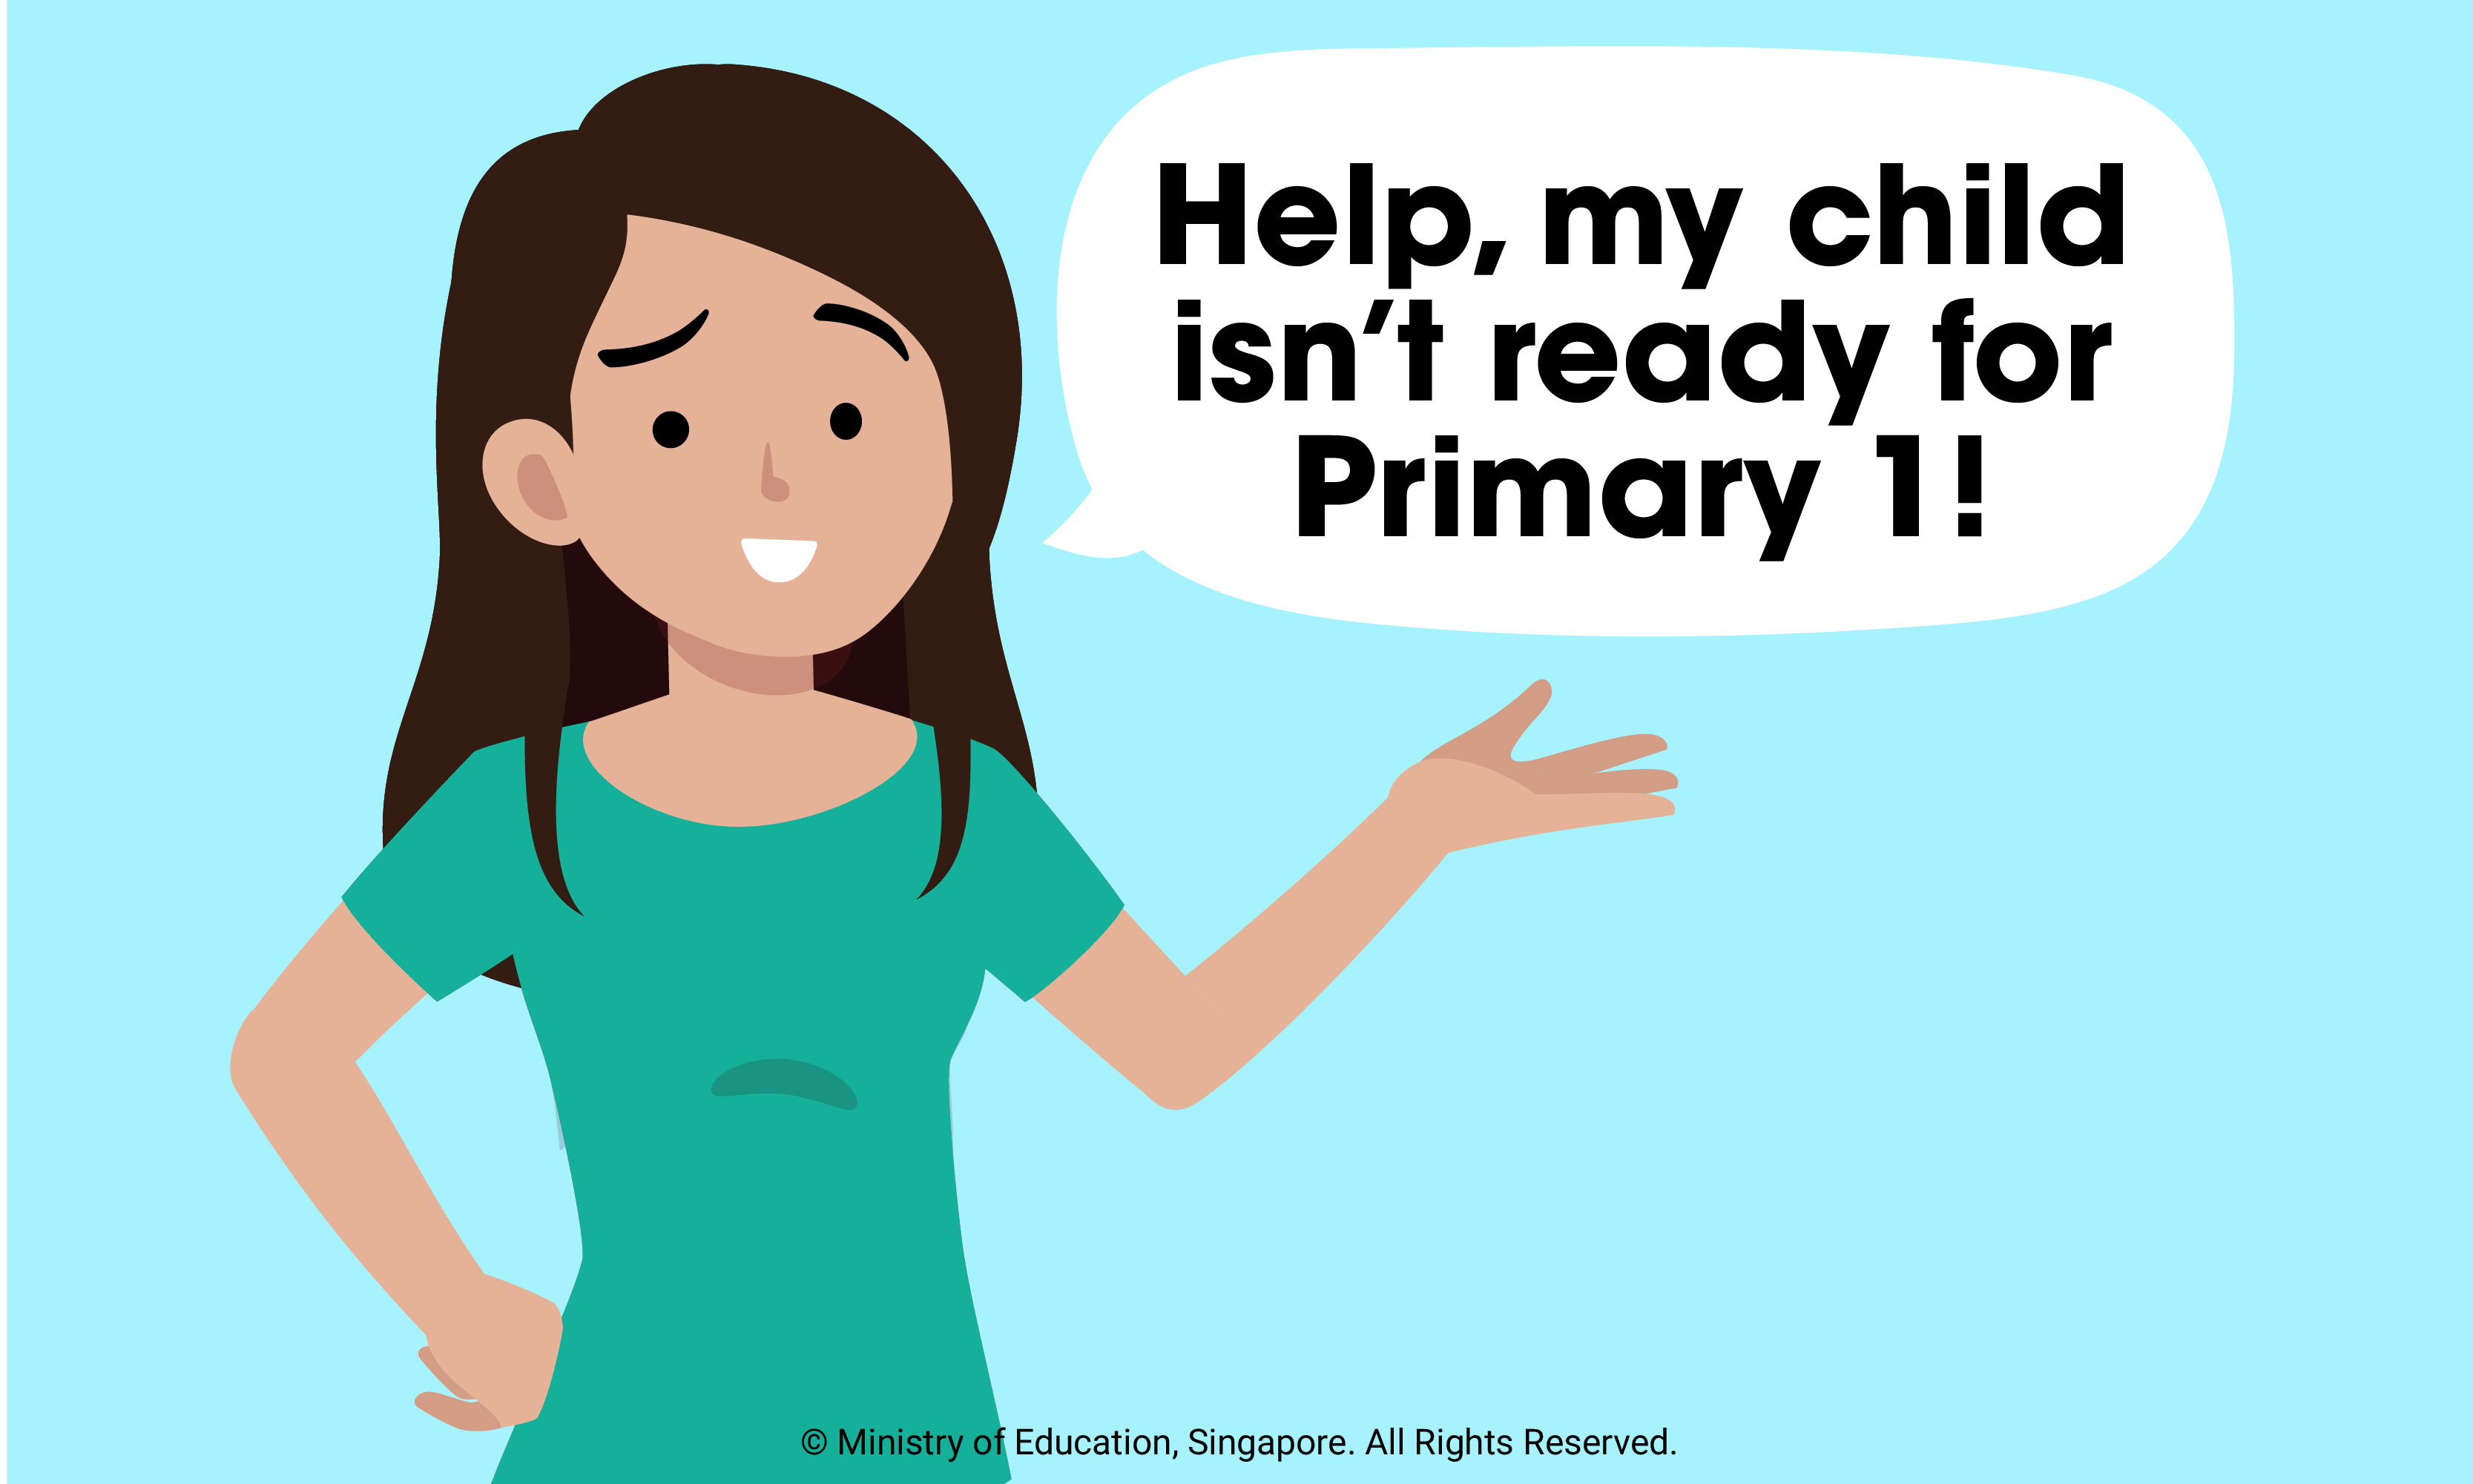 Help, my child isn’t ready for Primary 1!